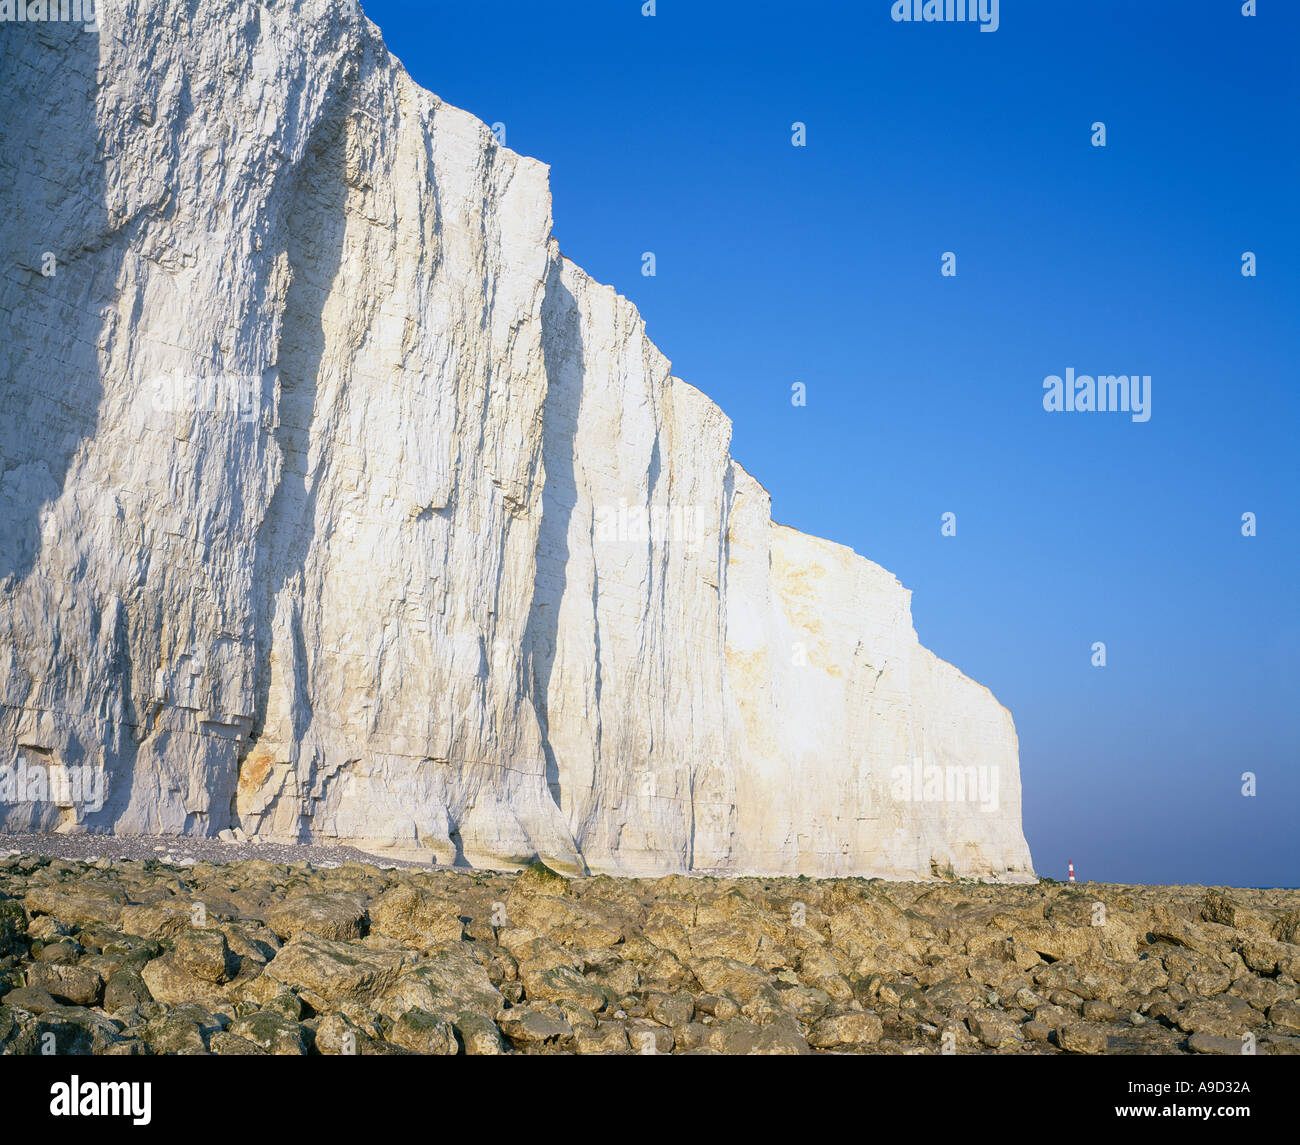 Beachy Head, South Downs, East Sussex, England, Regno Unito, GB. Foto Stock